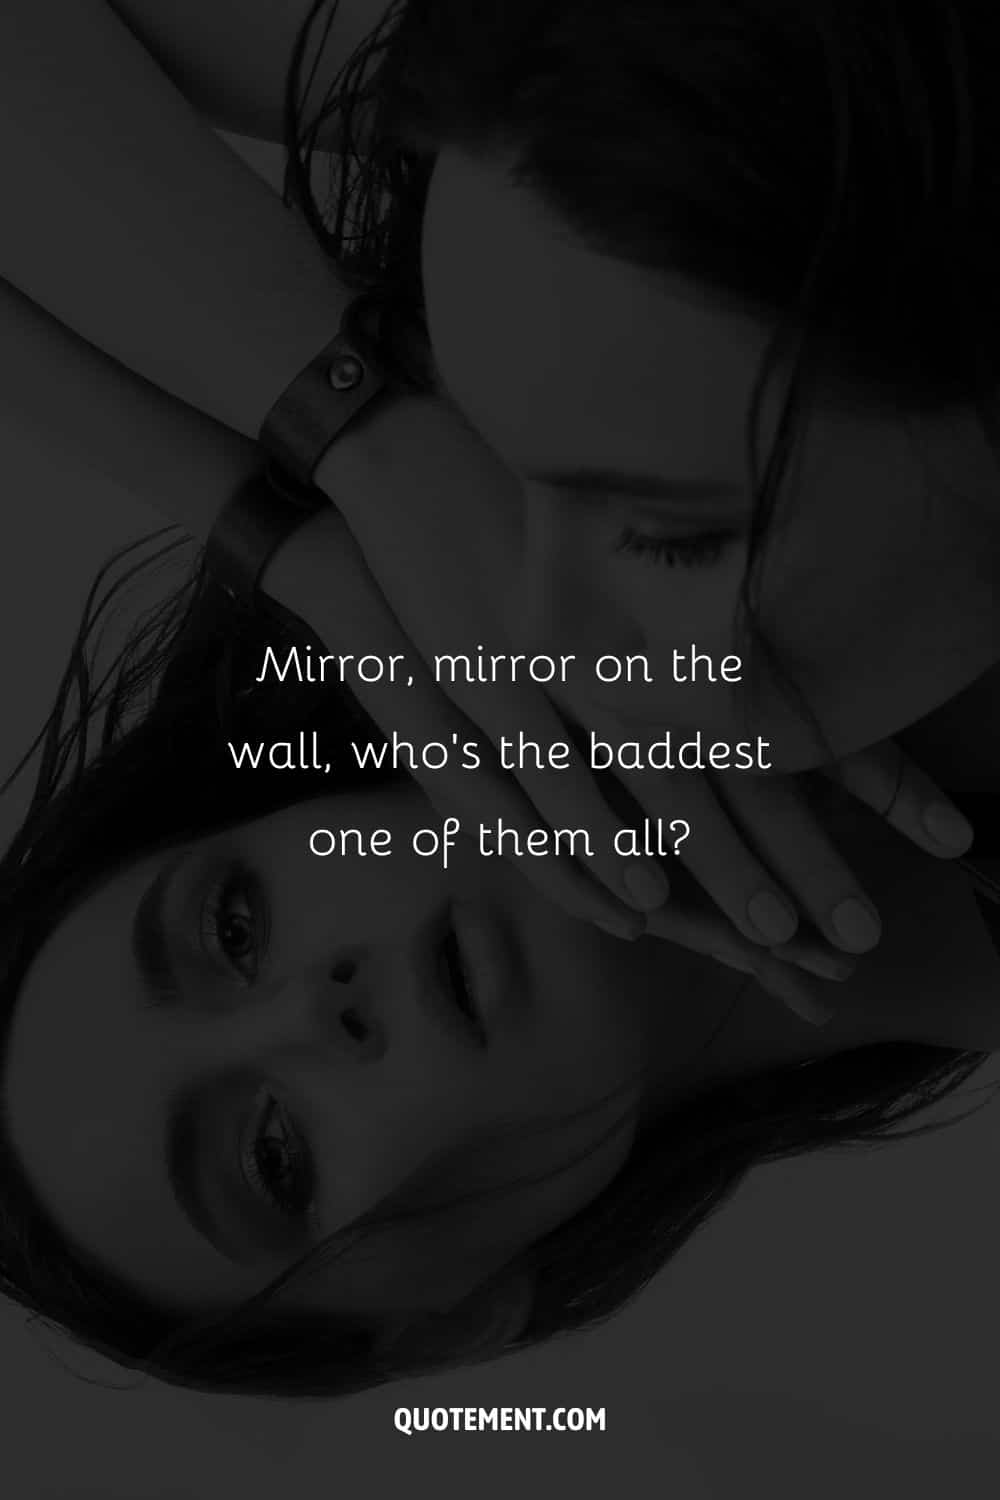 Image of a woman gazing at herself in mirror representing baddest bitch caption.